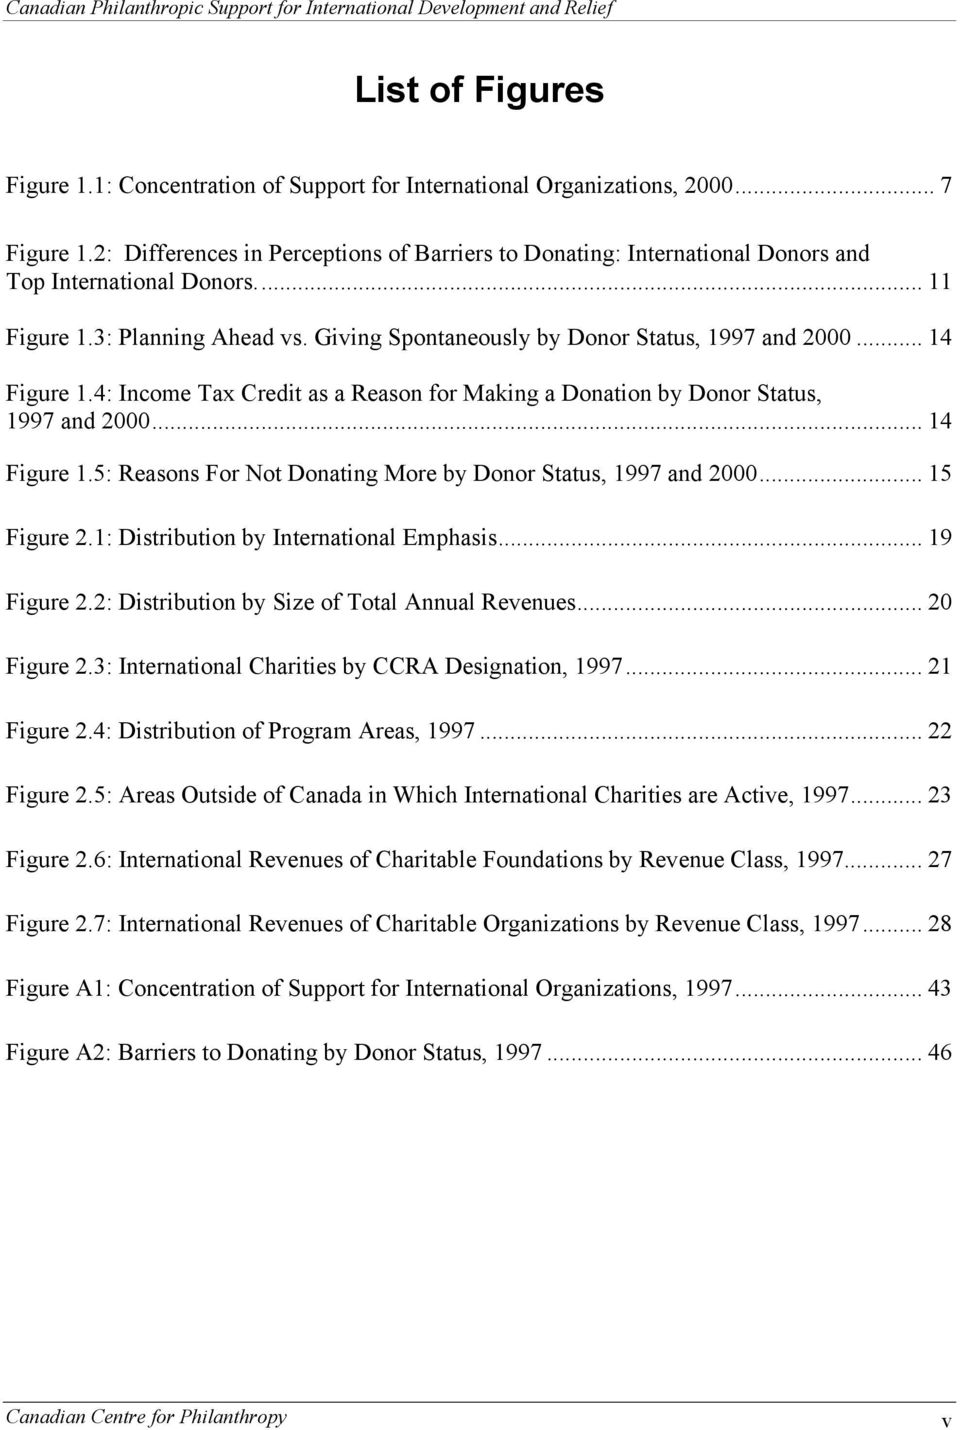 .. 14 Figure 1.4: Income Tax Credit as a Reason for Making a Donation by Donor Status, 1997 and 2000... 14 Figure 1.5: Reasons For Not Donating More by Donor Status, 1997 and 2000... 15 Figure 2.